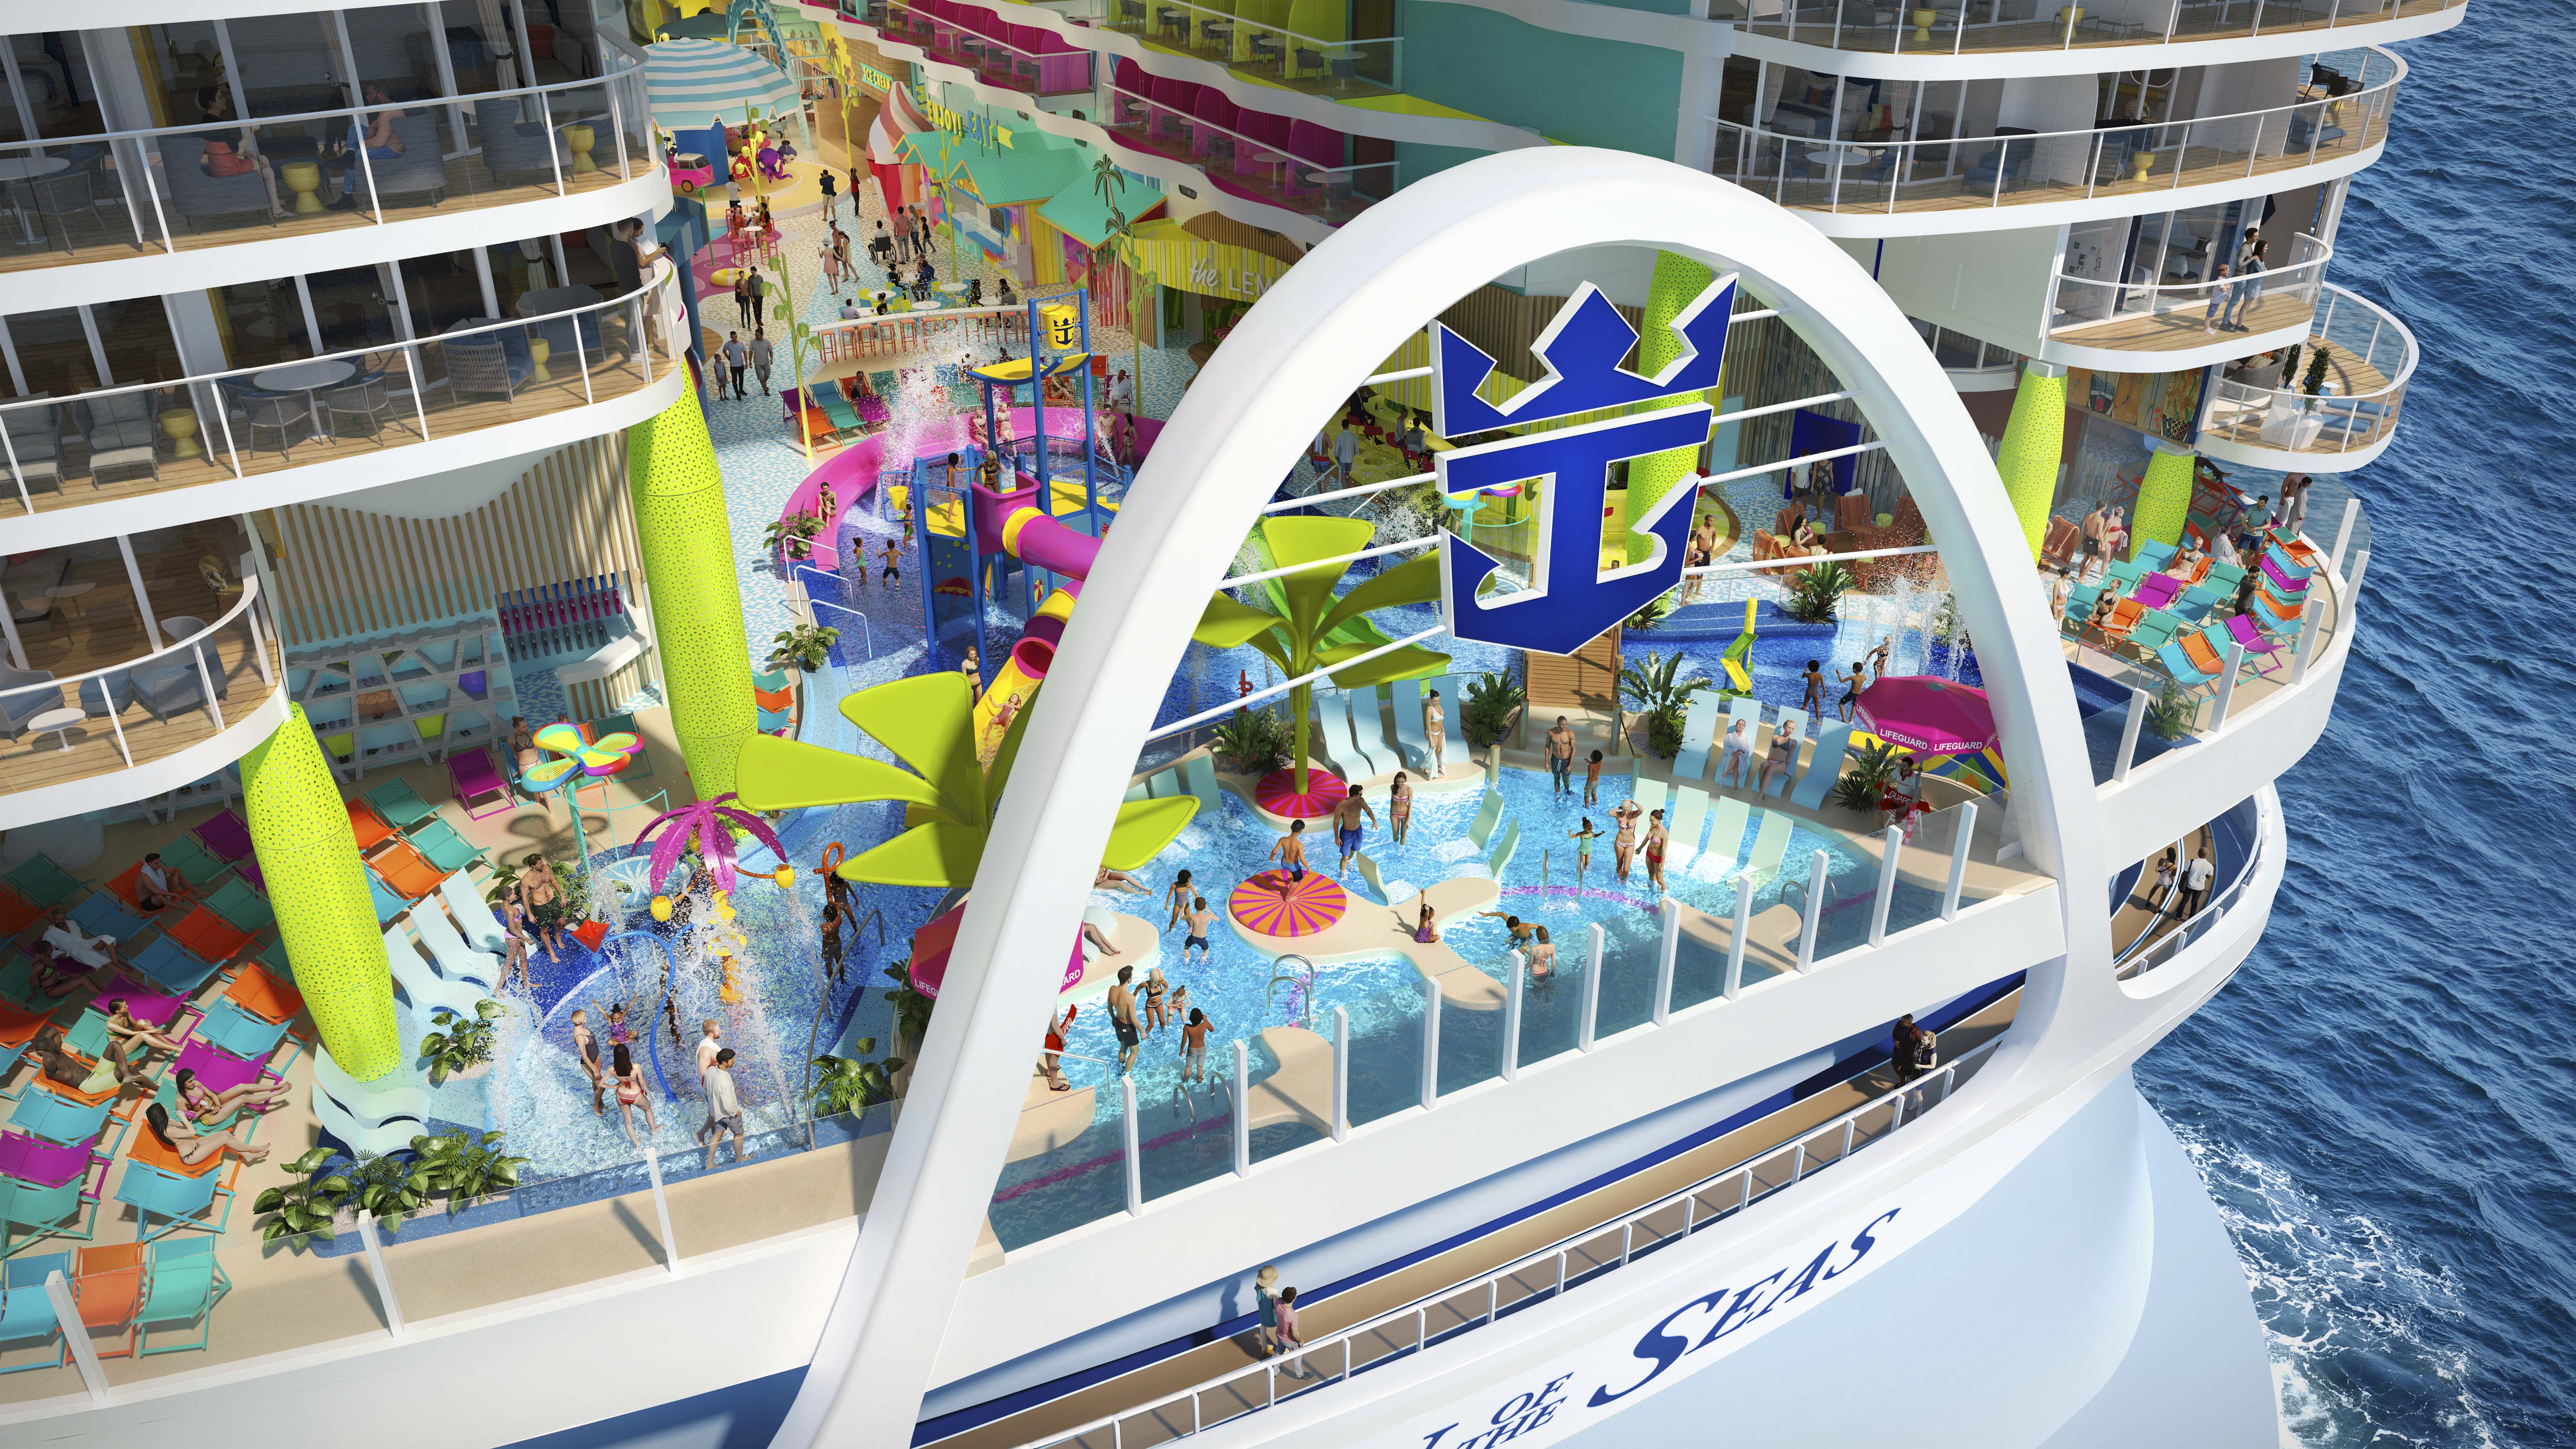 Five things to love about Royal Caribbean's new Harmony of the Seas